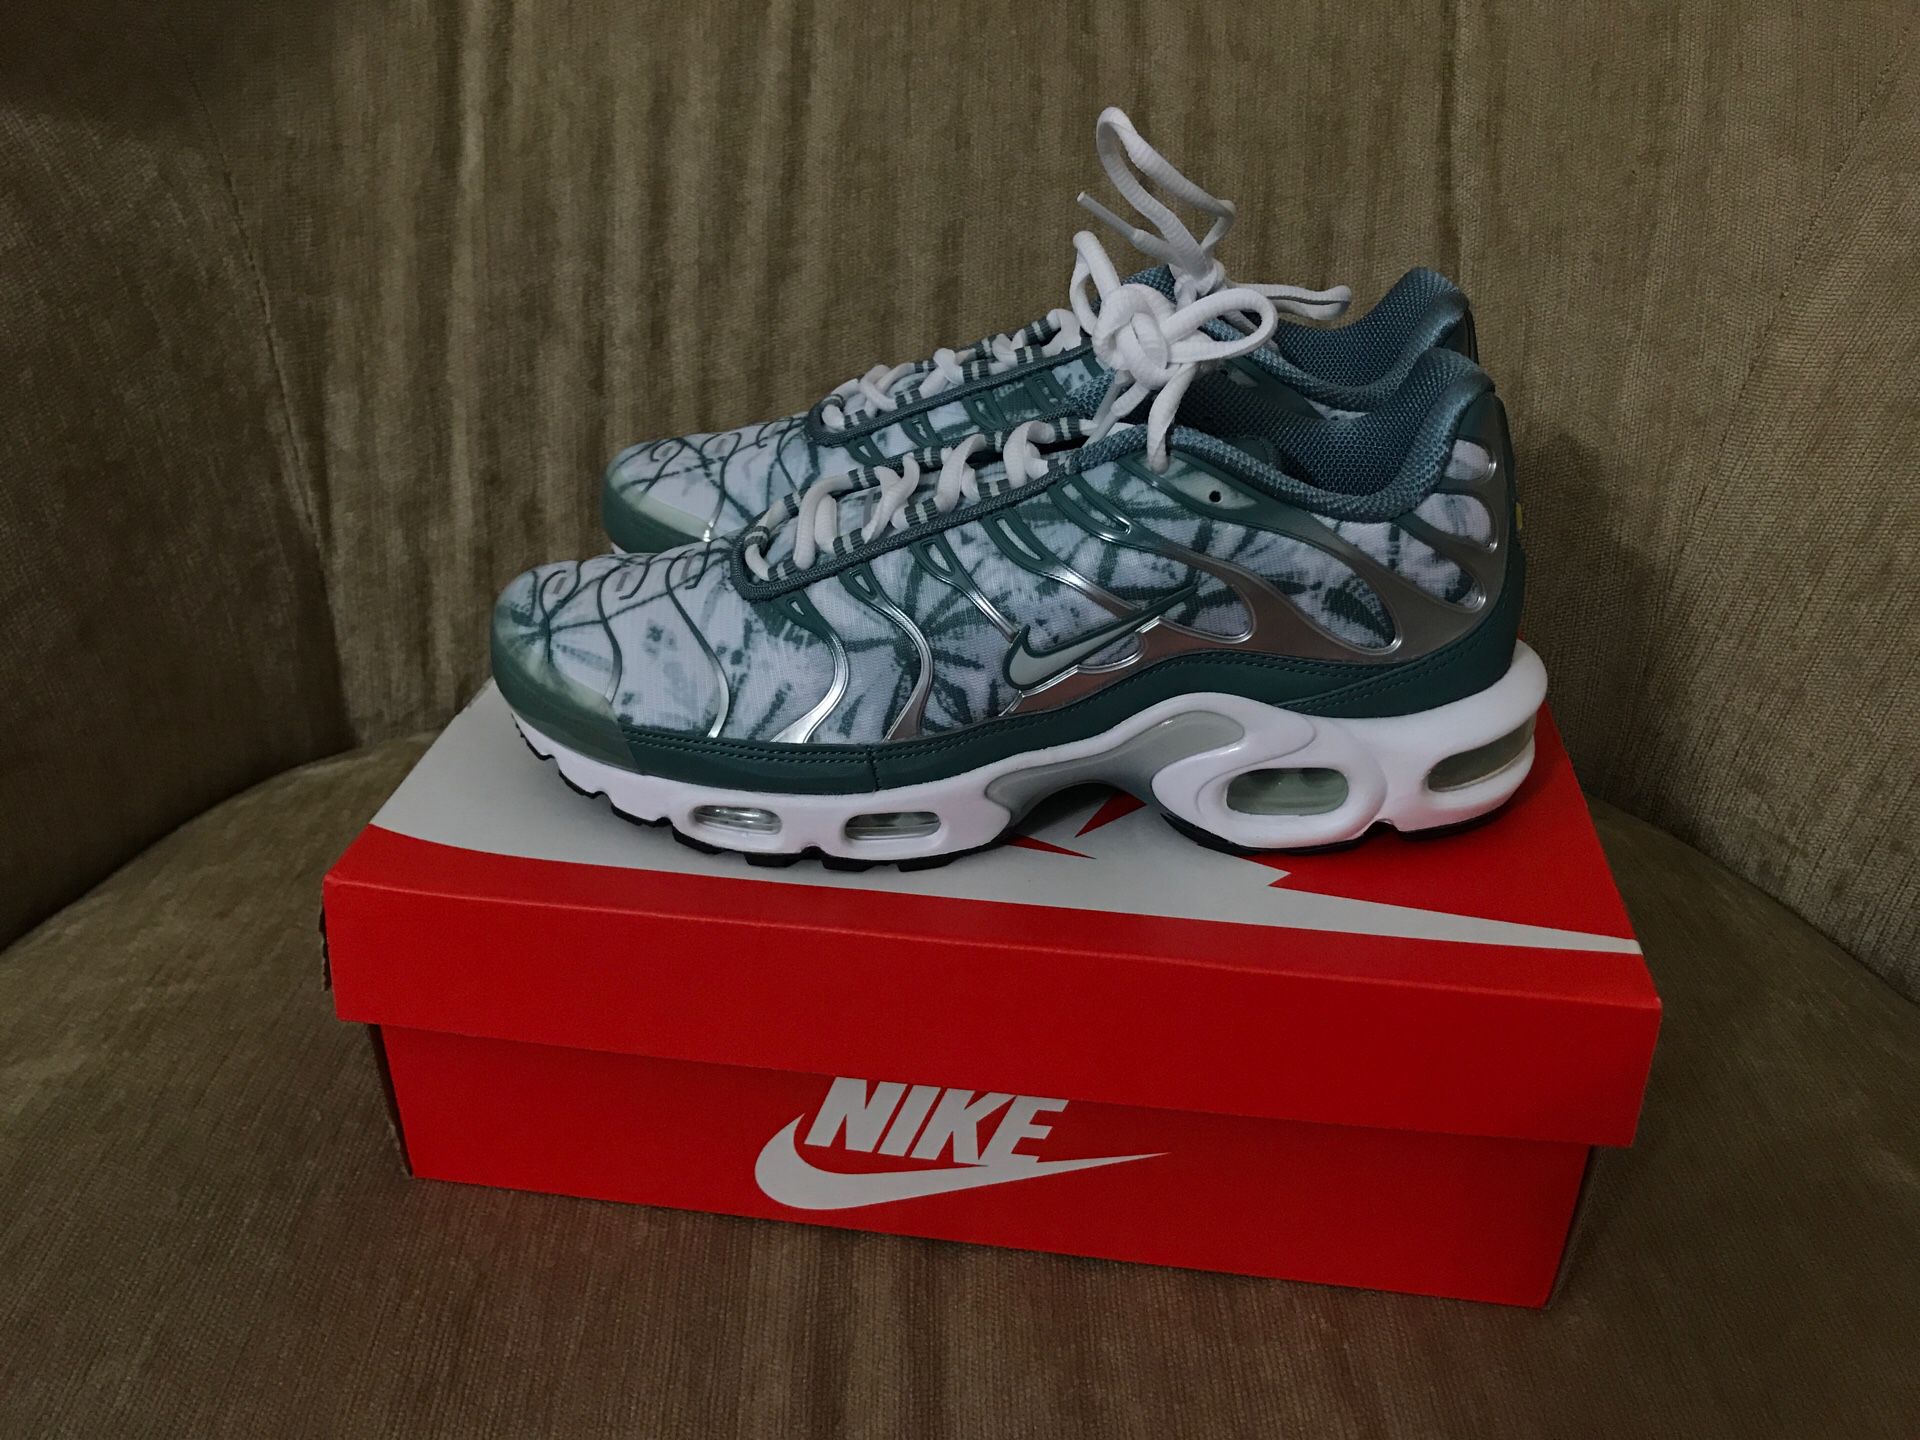 Nike air max plus fiber glass size 9 new never used before comes with box